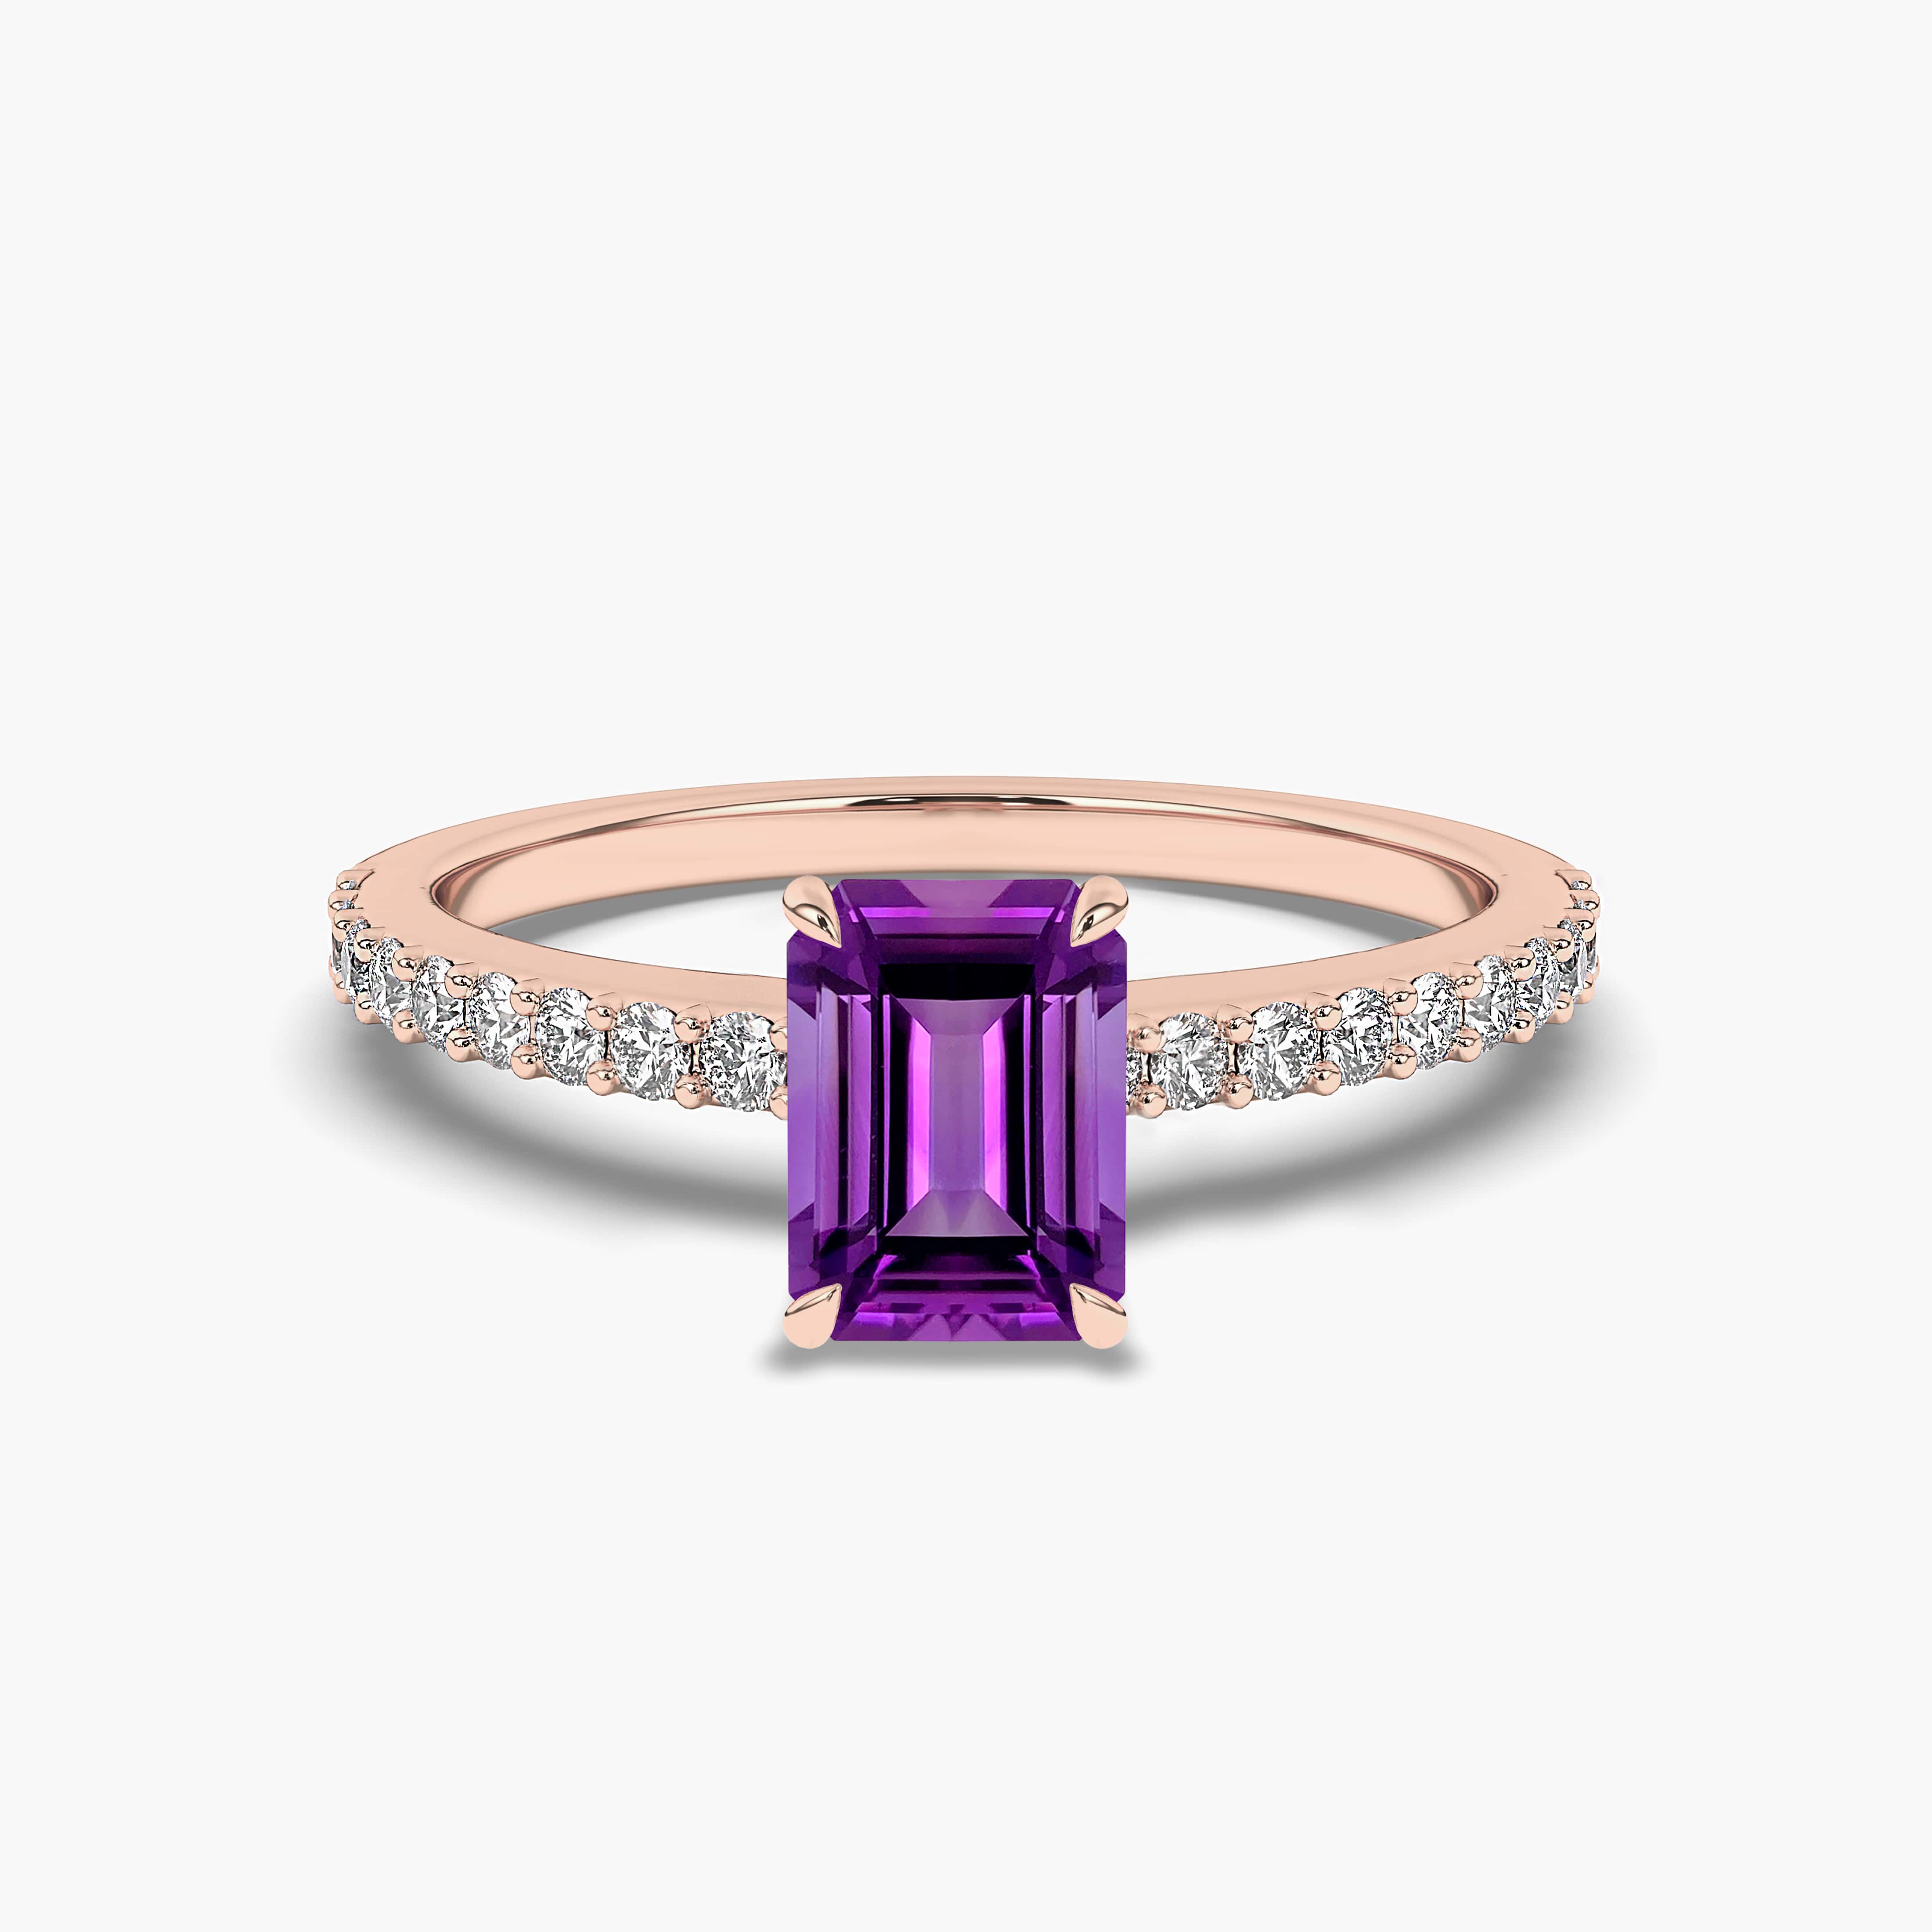 Emerald Cut Amethyst with Gemstone Side Stone Ring In Rose Gold